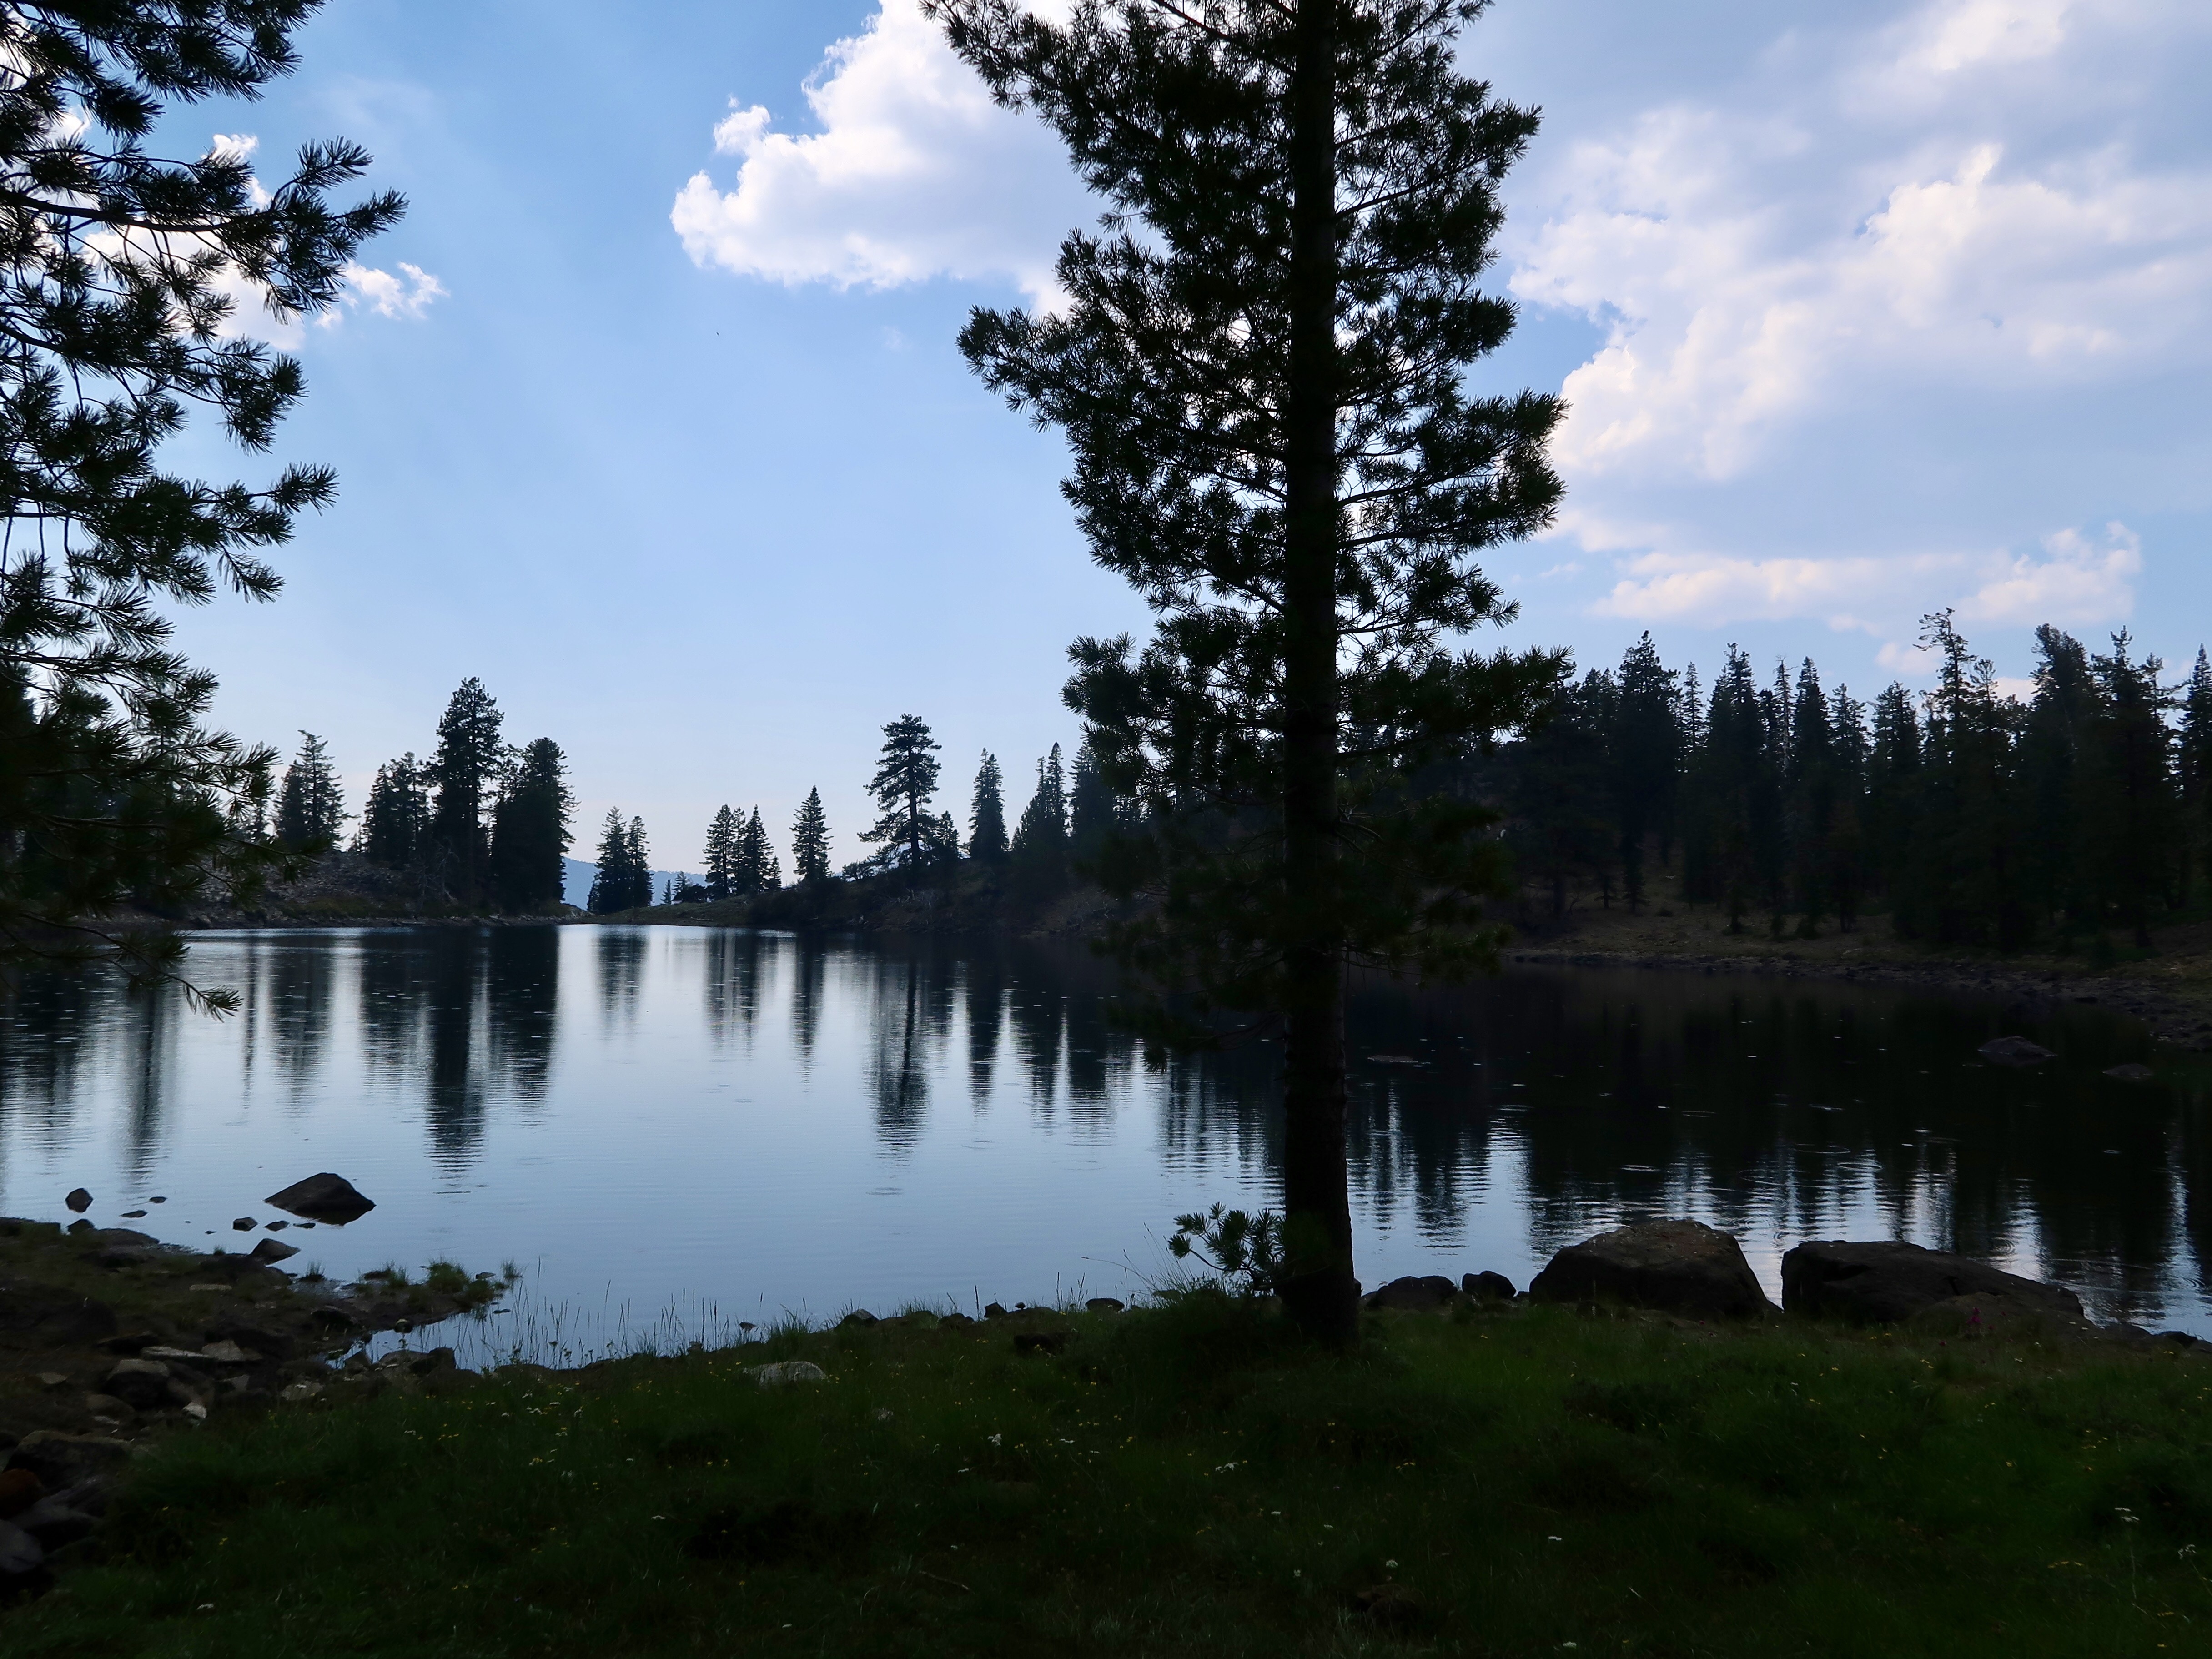 PCT Day 112 – Swimming in Lower Deadfall Lake